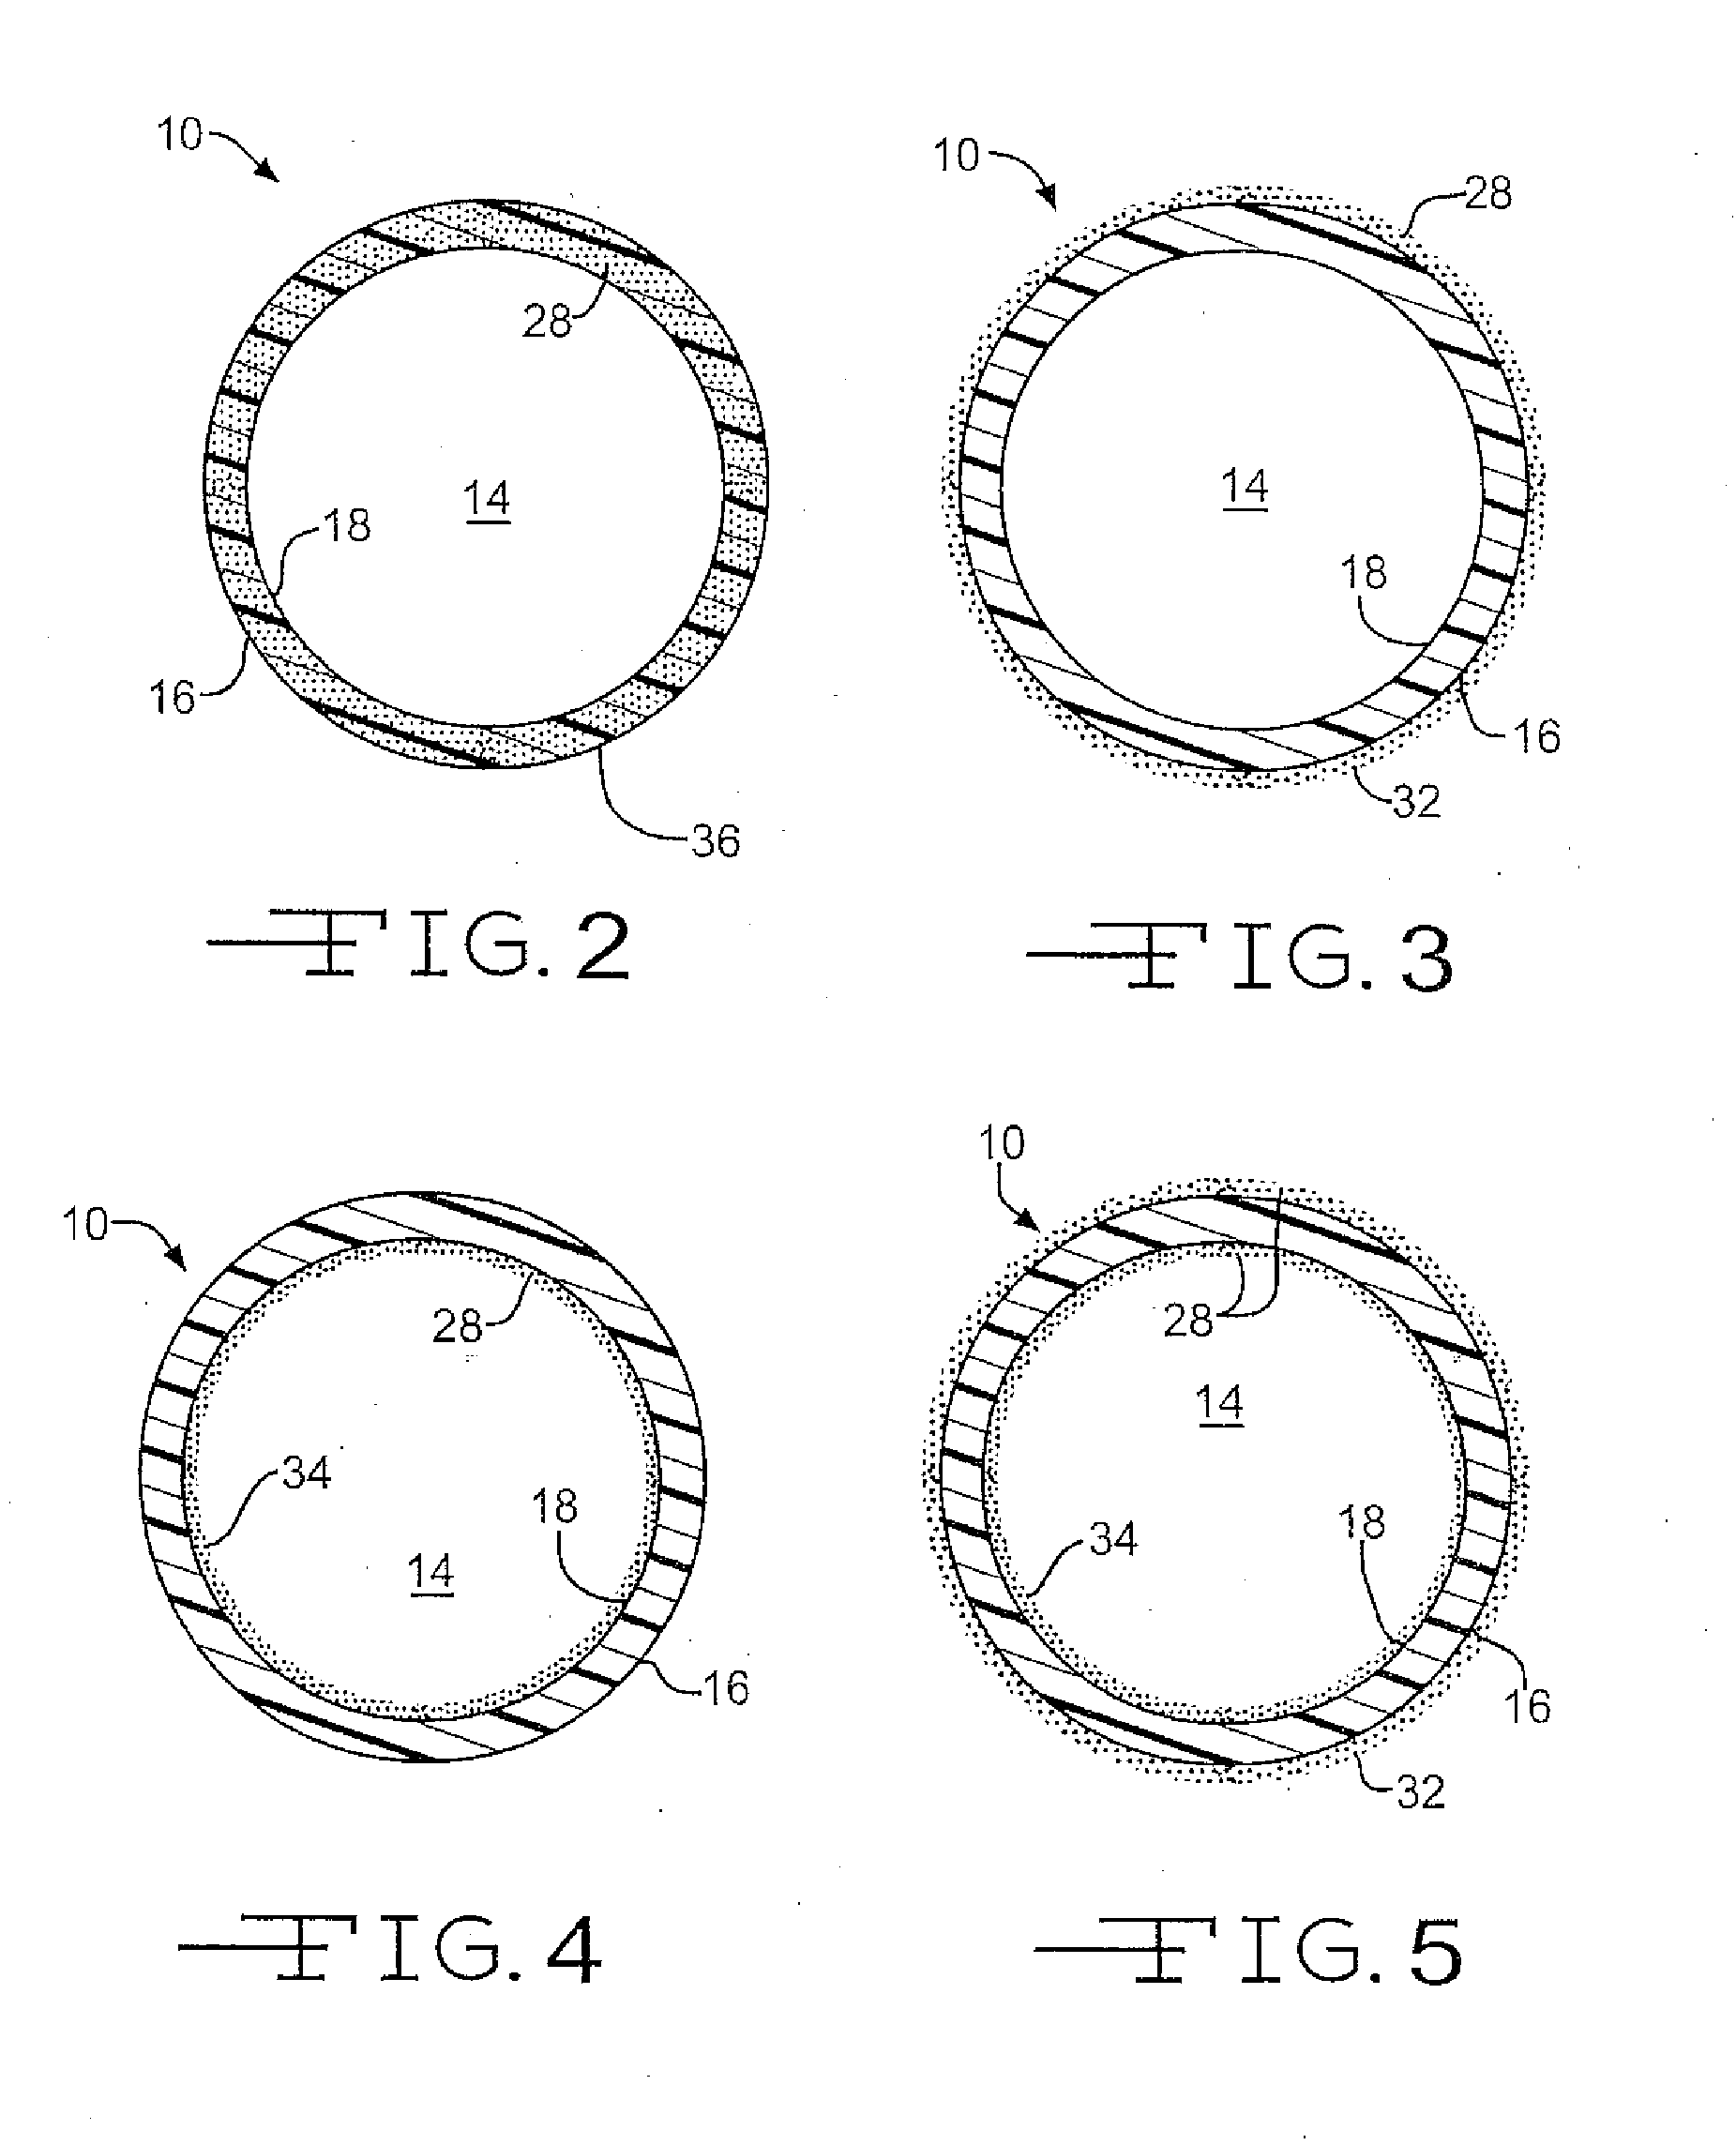 Medical device with therapeutic agents